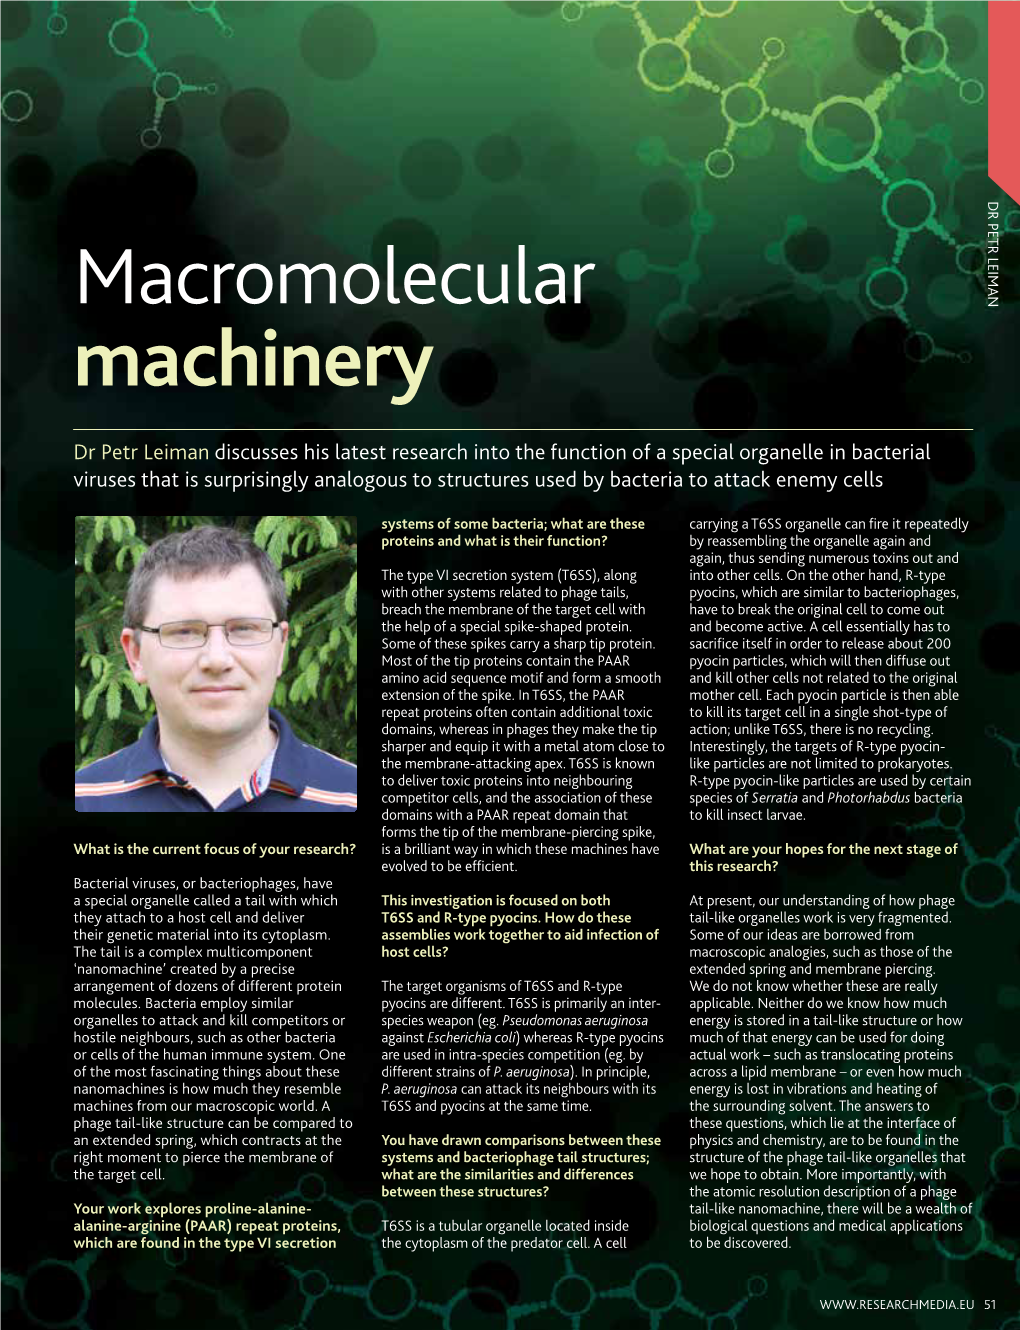 Structure, Function, and Assembly of Macromolecular Machines Involved